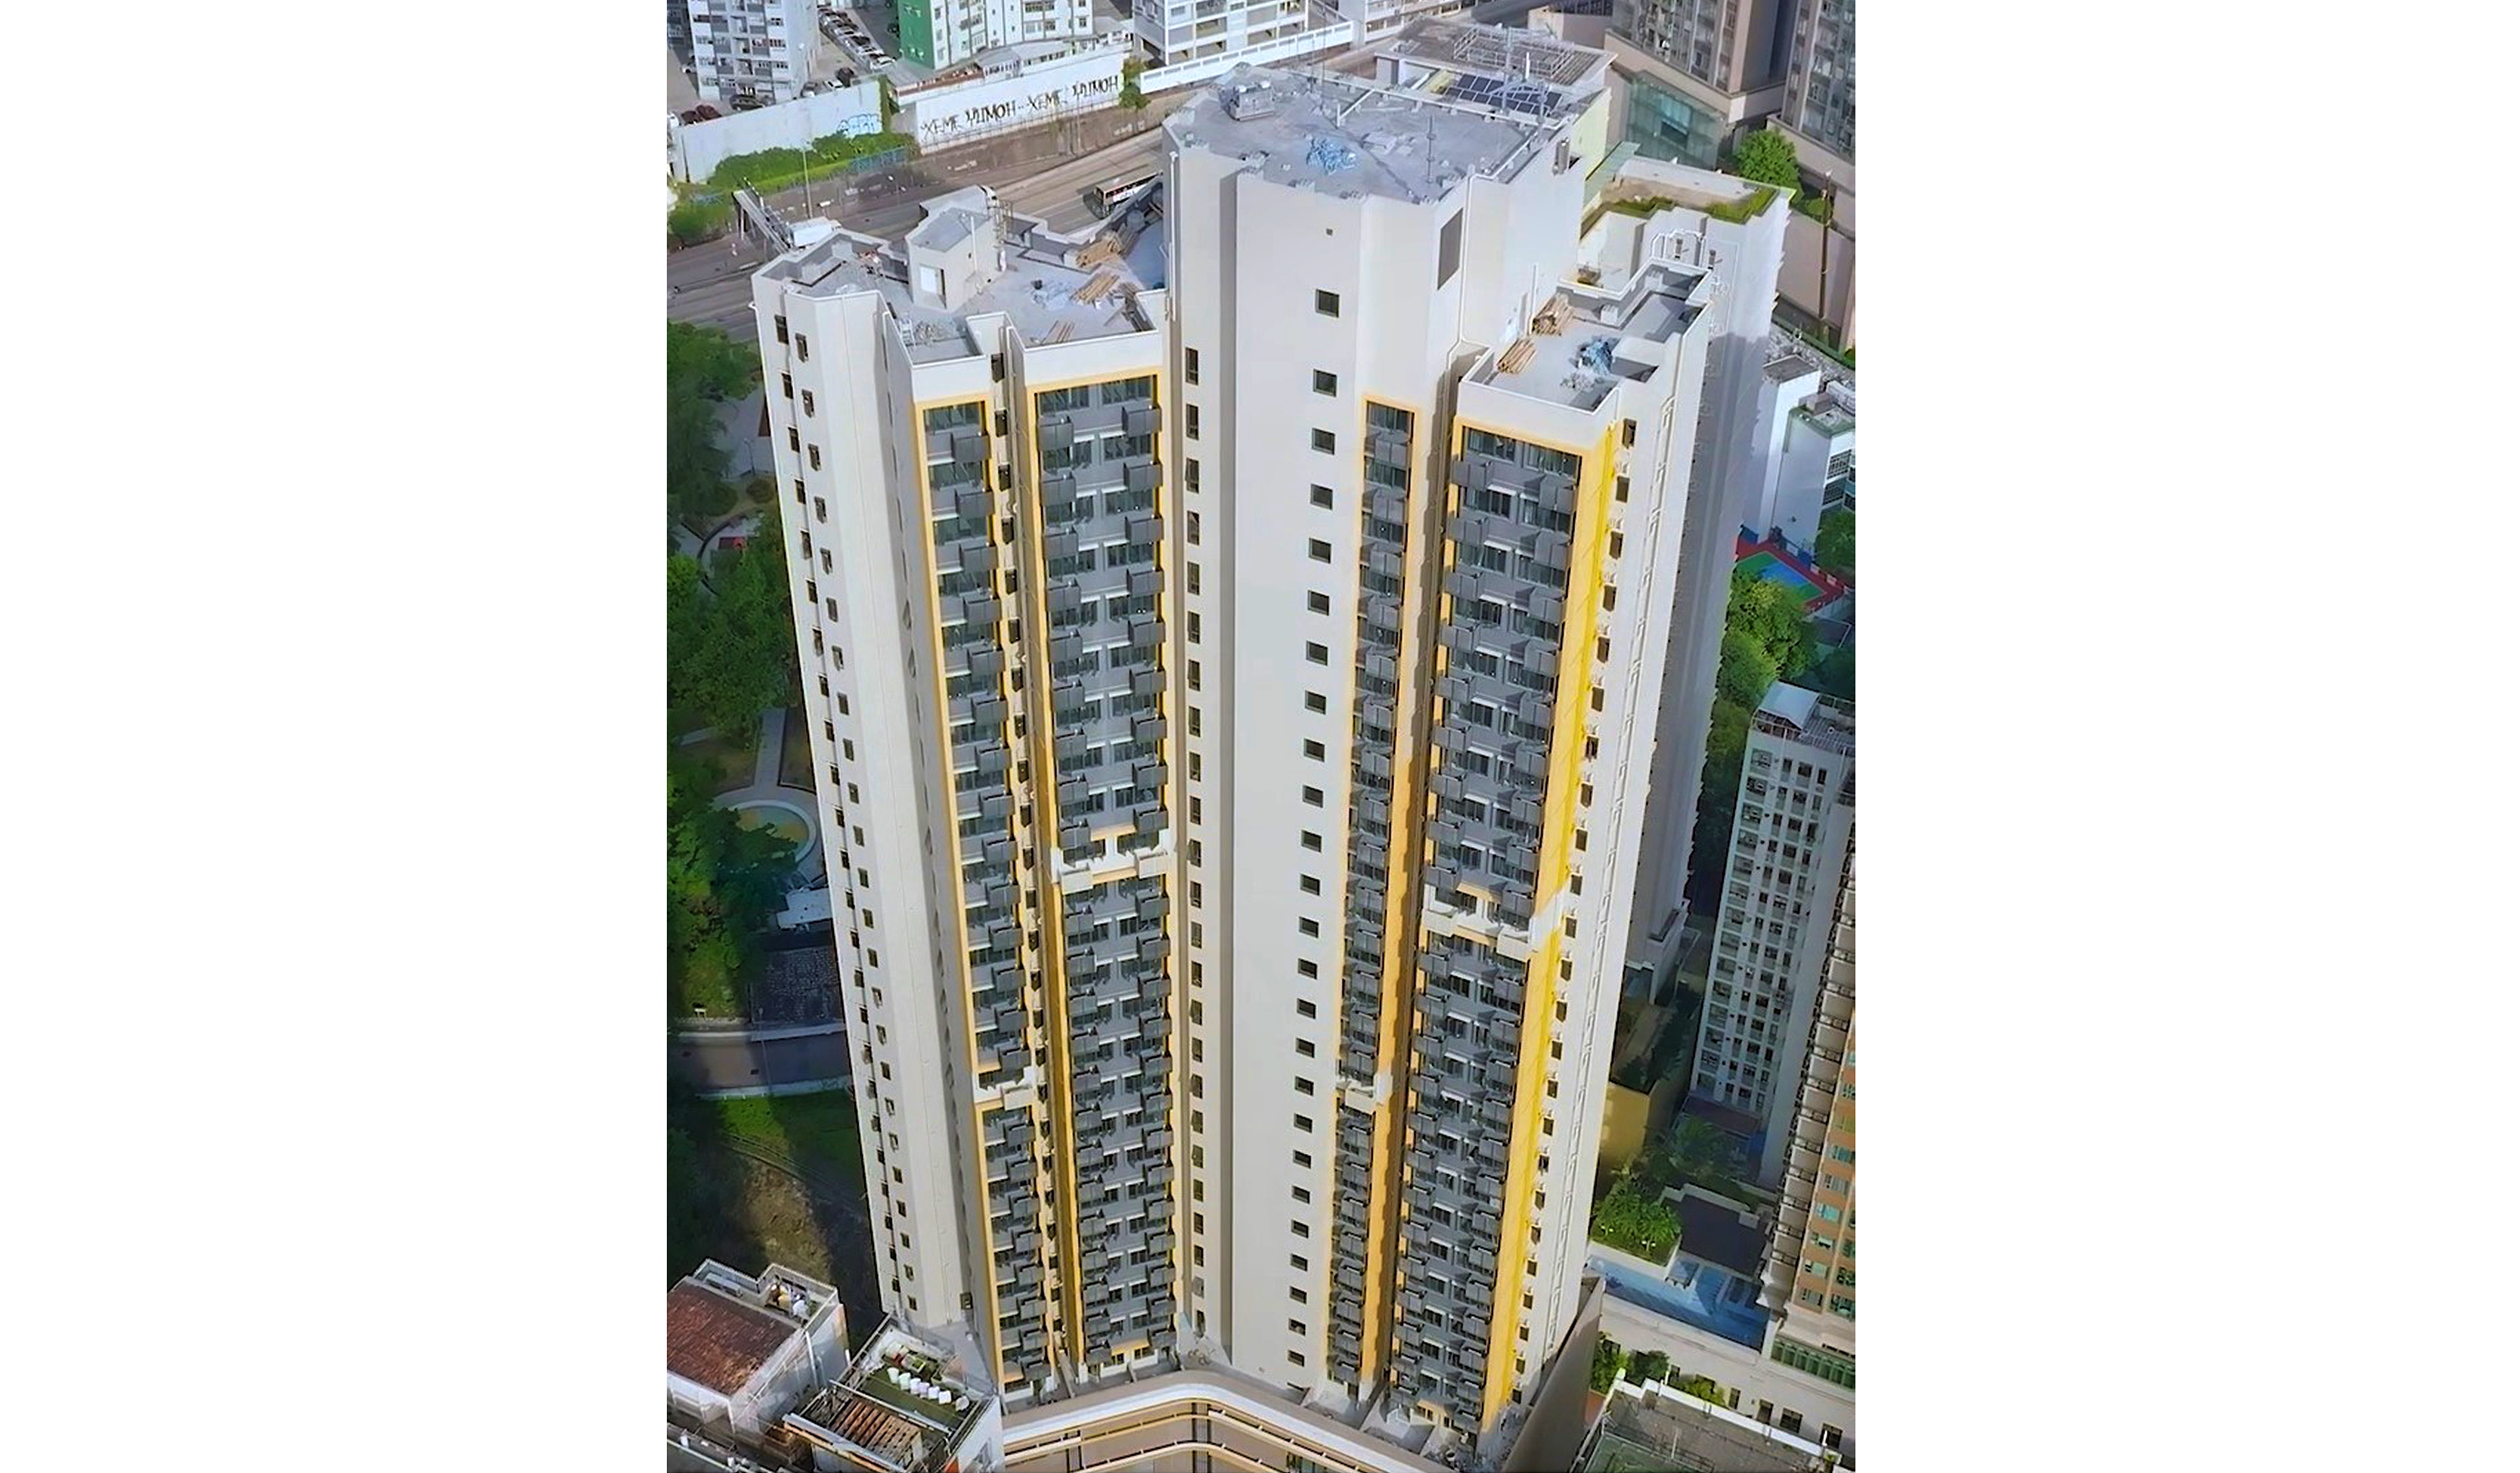 Located at 8 Lee Kung Street, Hung Hom, the Blissful Place is an age-friendly housing project providing 312 studio and one-bedroom flats.